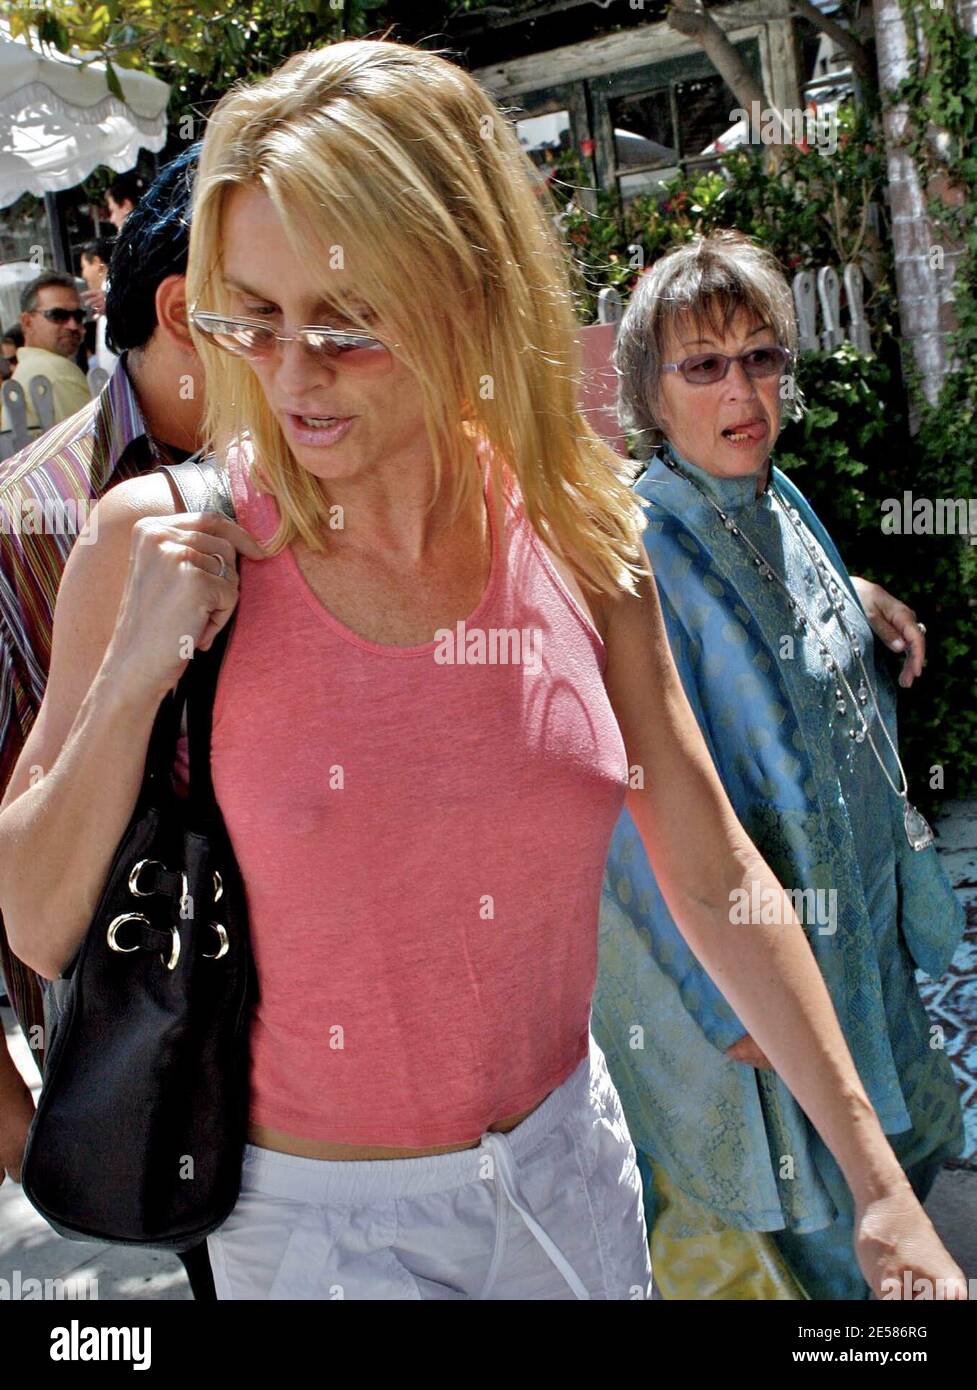 A perky Nicollette Sheridan shops along Robertson Boulevard with friends. The actress bought a new set of clothes but apparently no bra. Sheridan wore the new outfit out of the store and helped her friend to her feet when she fell during the shopping trip. West Hollywood, Calif. 5/24/07.  [[laj]] Stock Photo